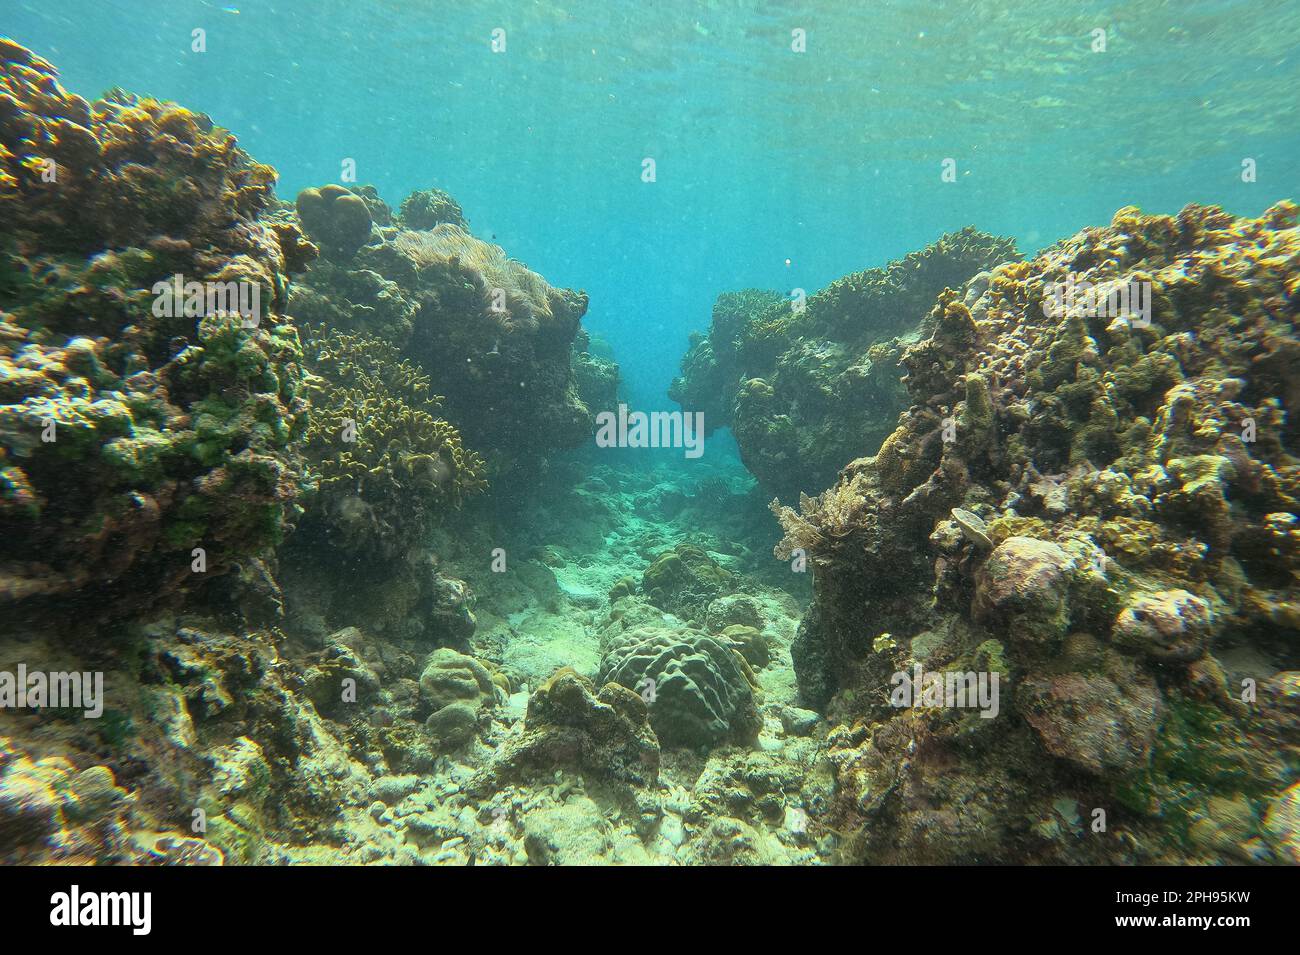 Idyllic shot of a coral reef in Siquijor in the Philippines, underwater ...